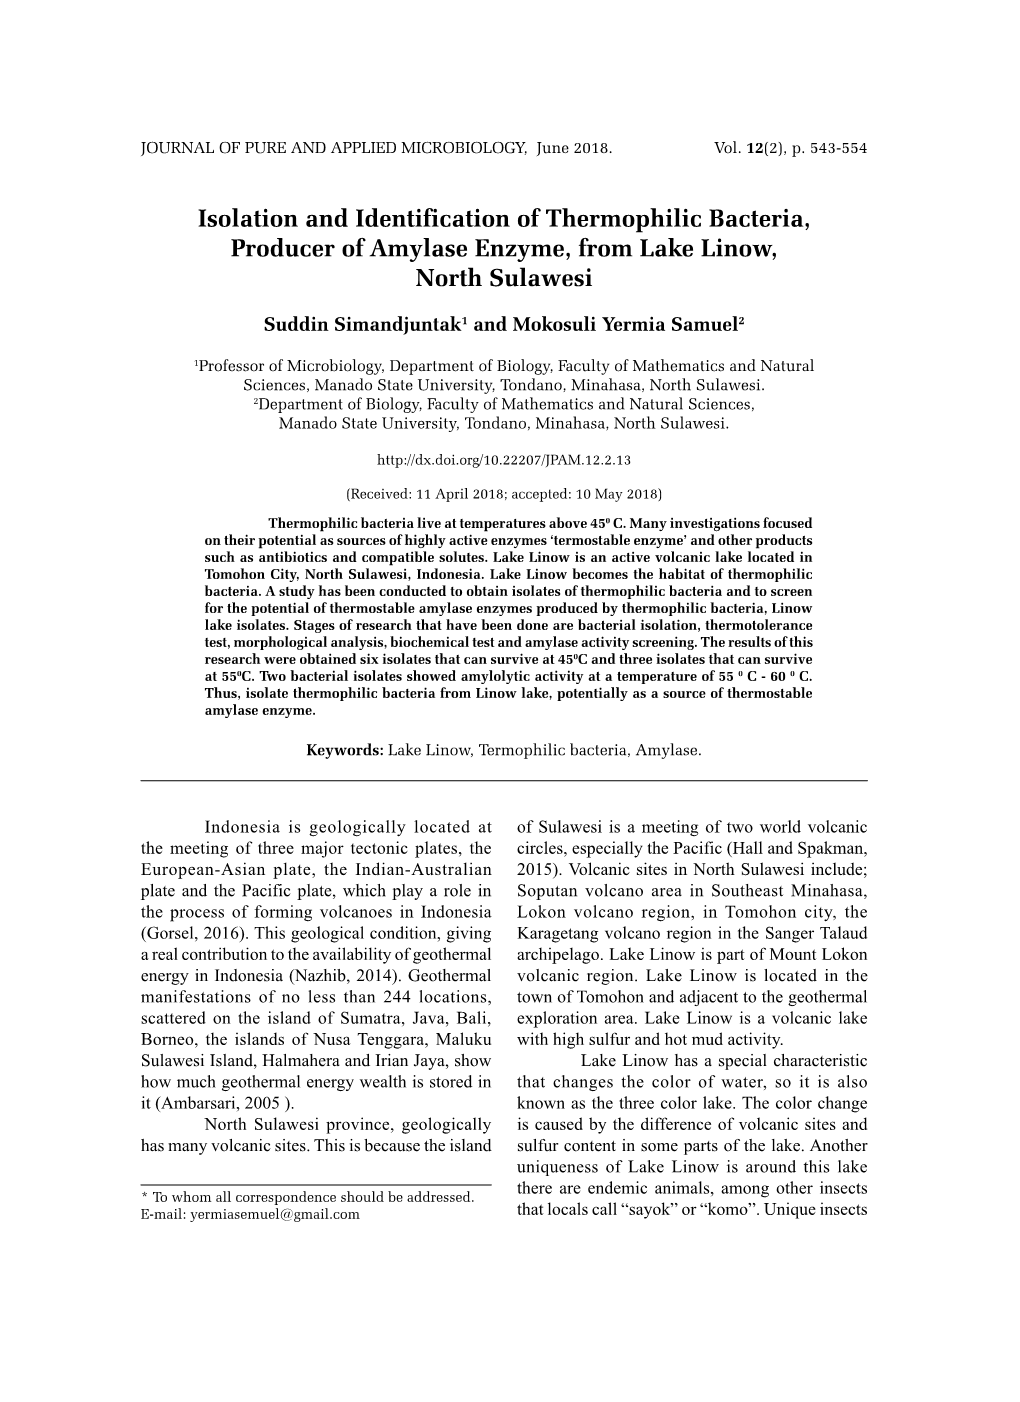 Isolation and Identification of Thermophilic Bacteria, Producer of Amylase Enzyme, from Lake Linow, North Sulawesi